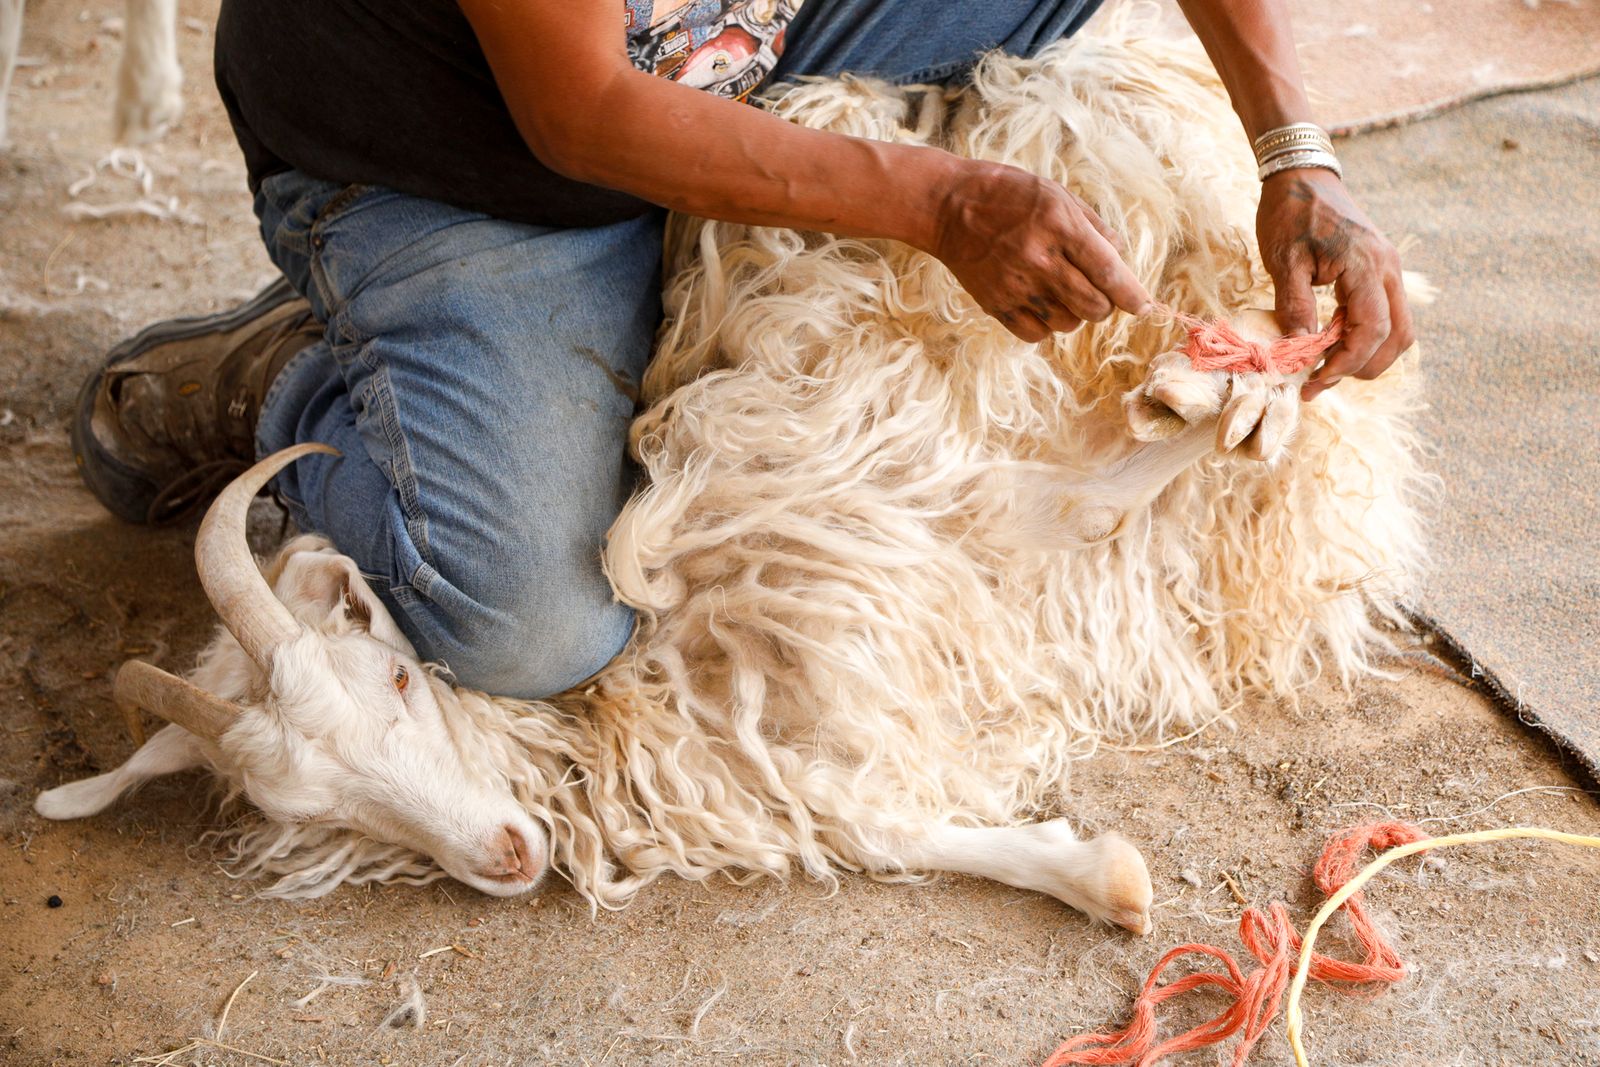 © Julien McRoberts - A sheep is tied up so he can be sheared